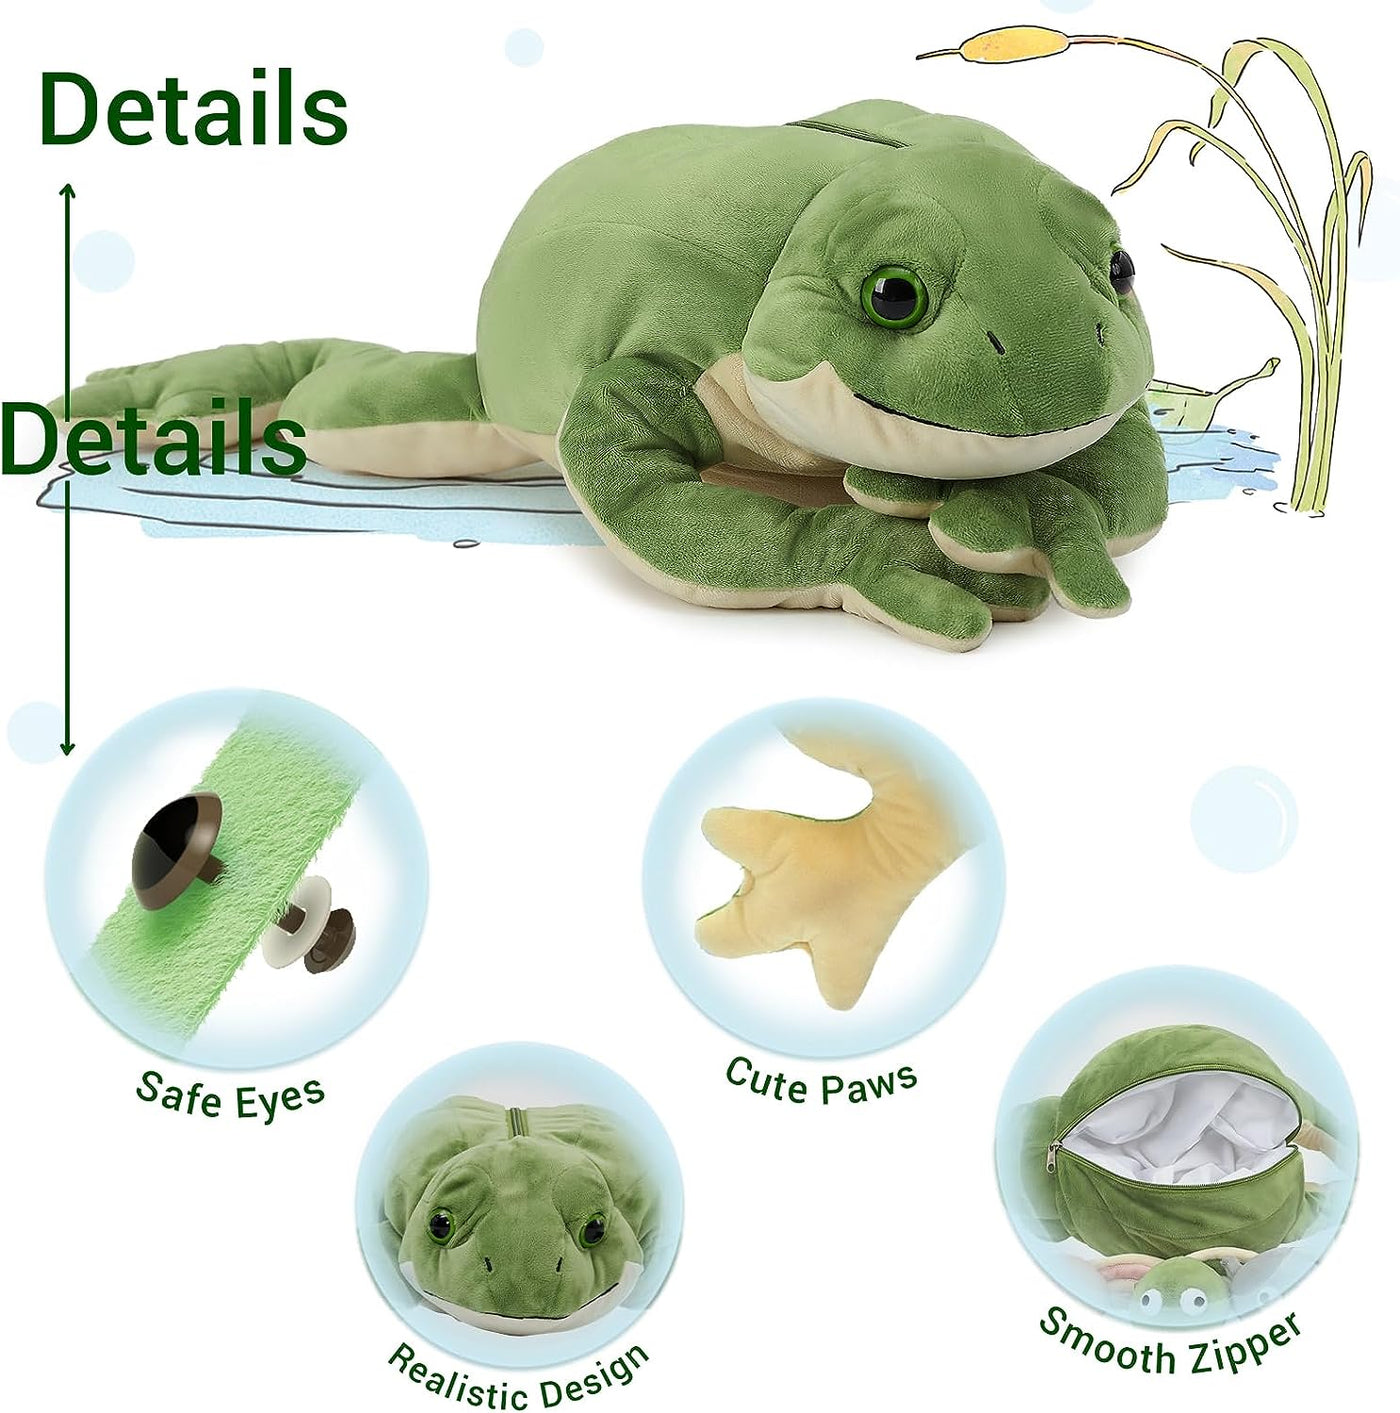 Frog Stuffed Animal Toy Set, 20 Inches